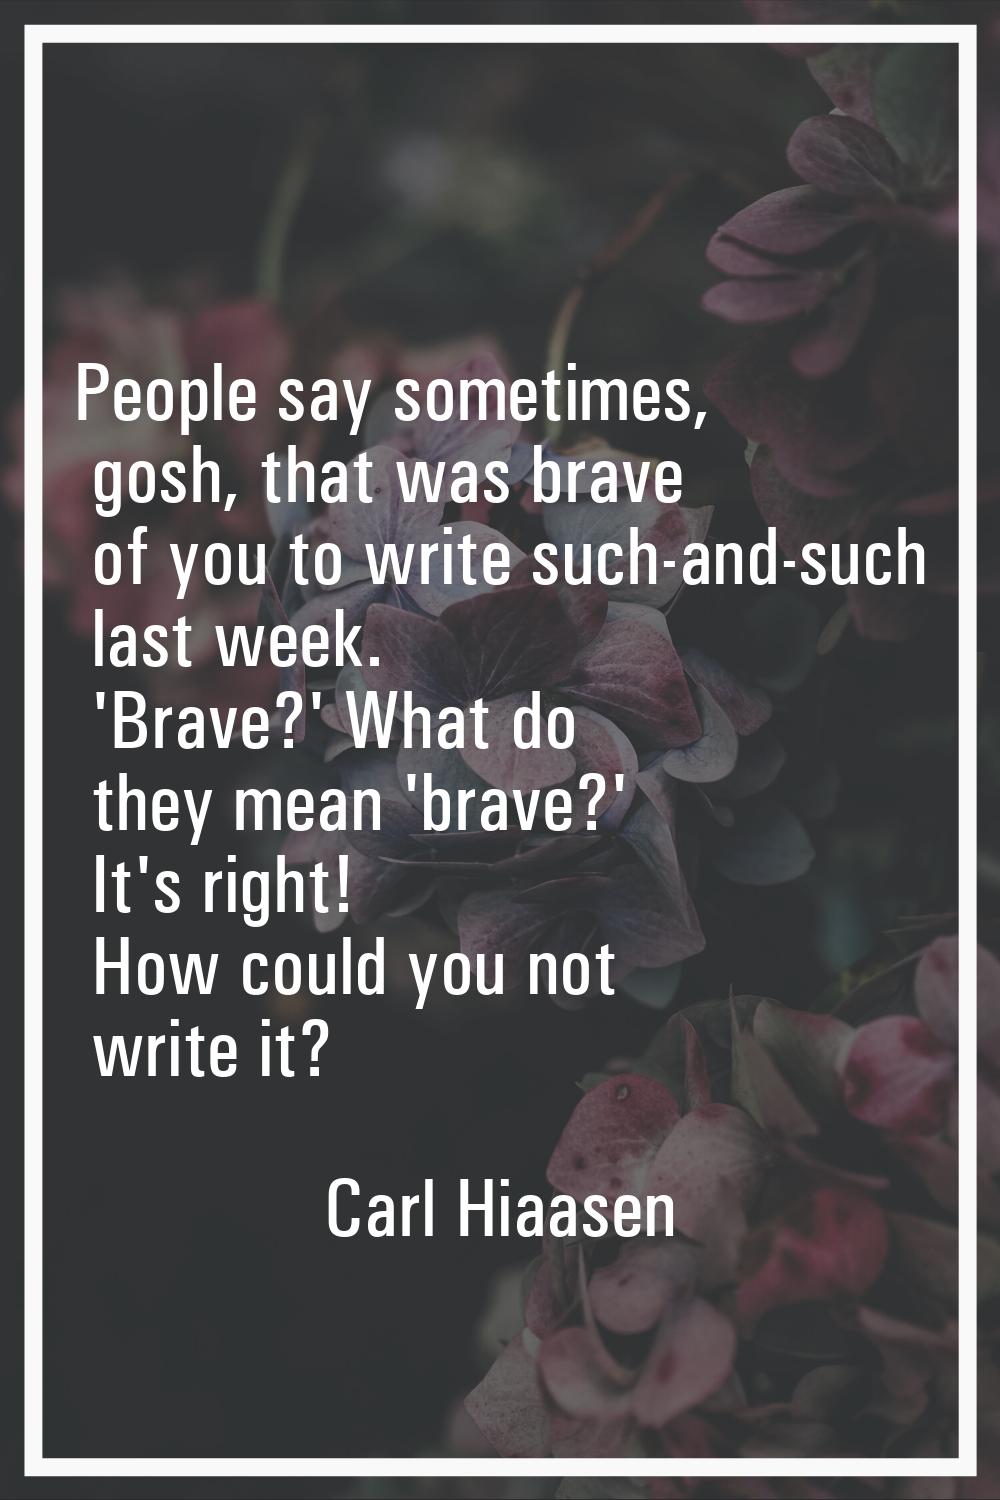 People say sometimes, gosh, that was brave of you to write such-and-such last week. 'Brave?' What d